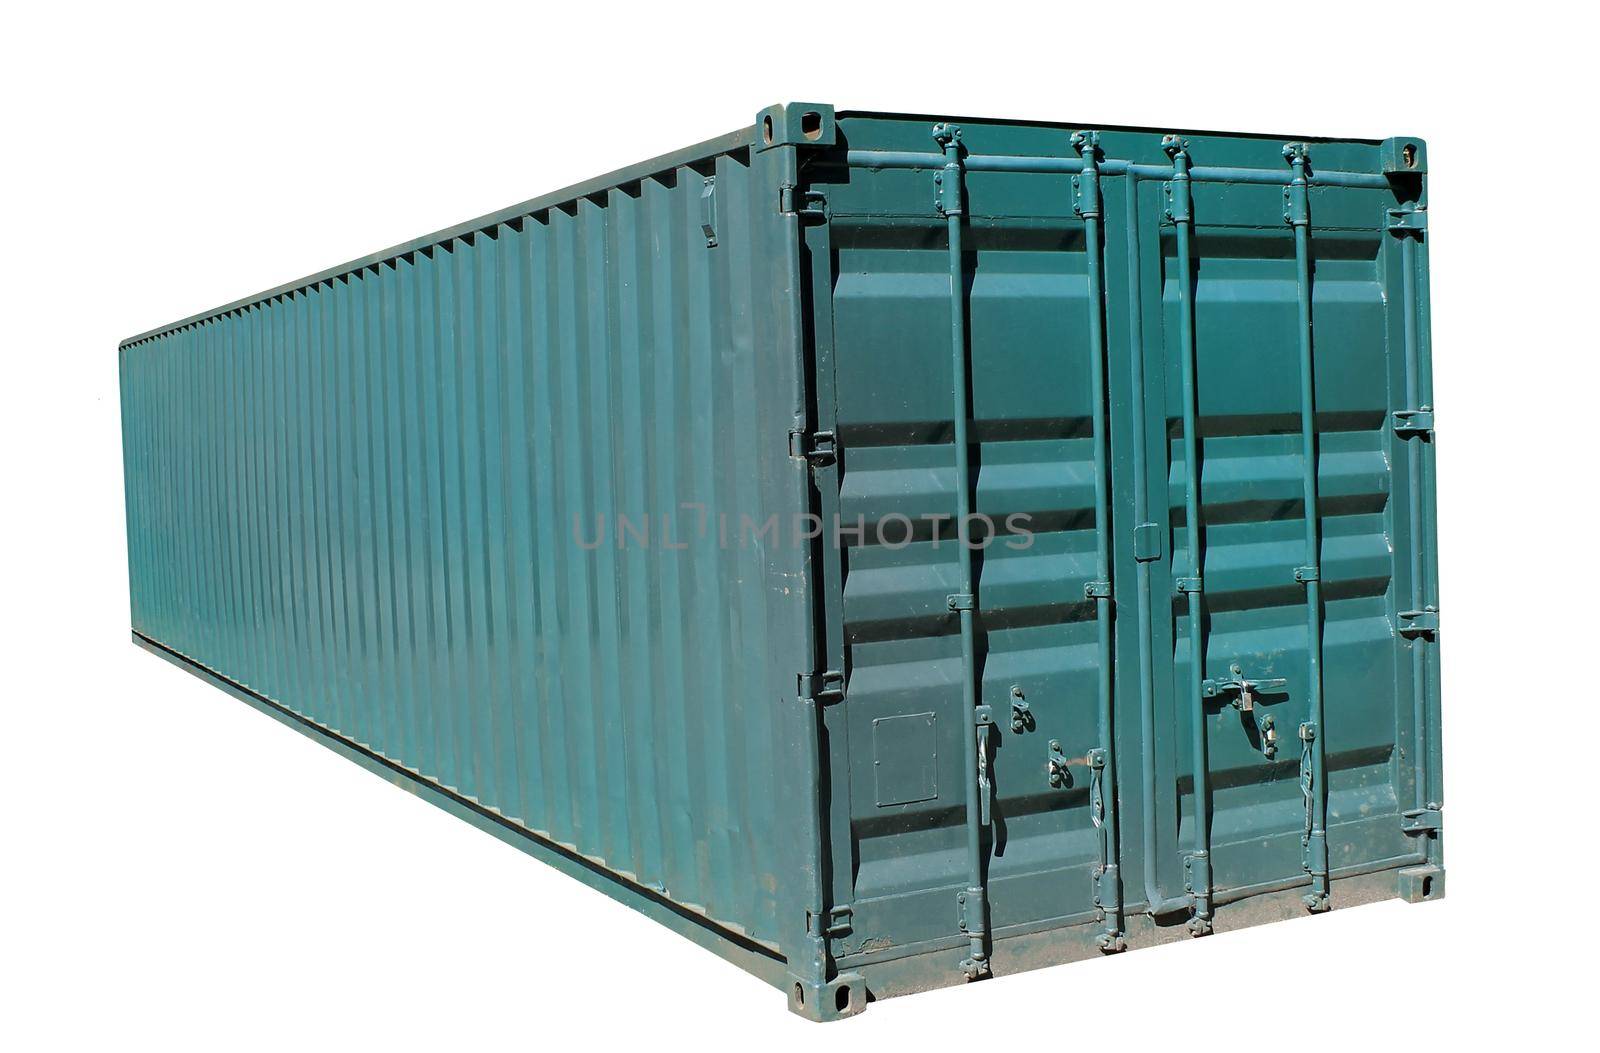 Shipping container isolated on a white background.